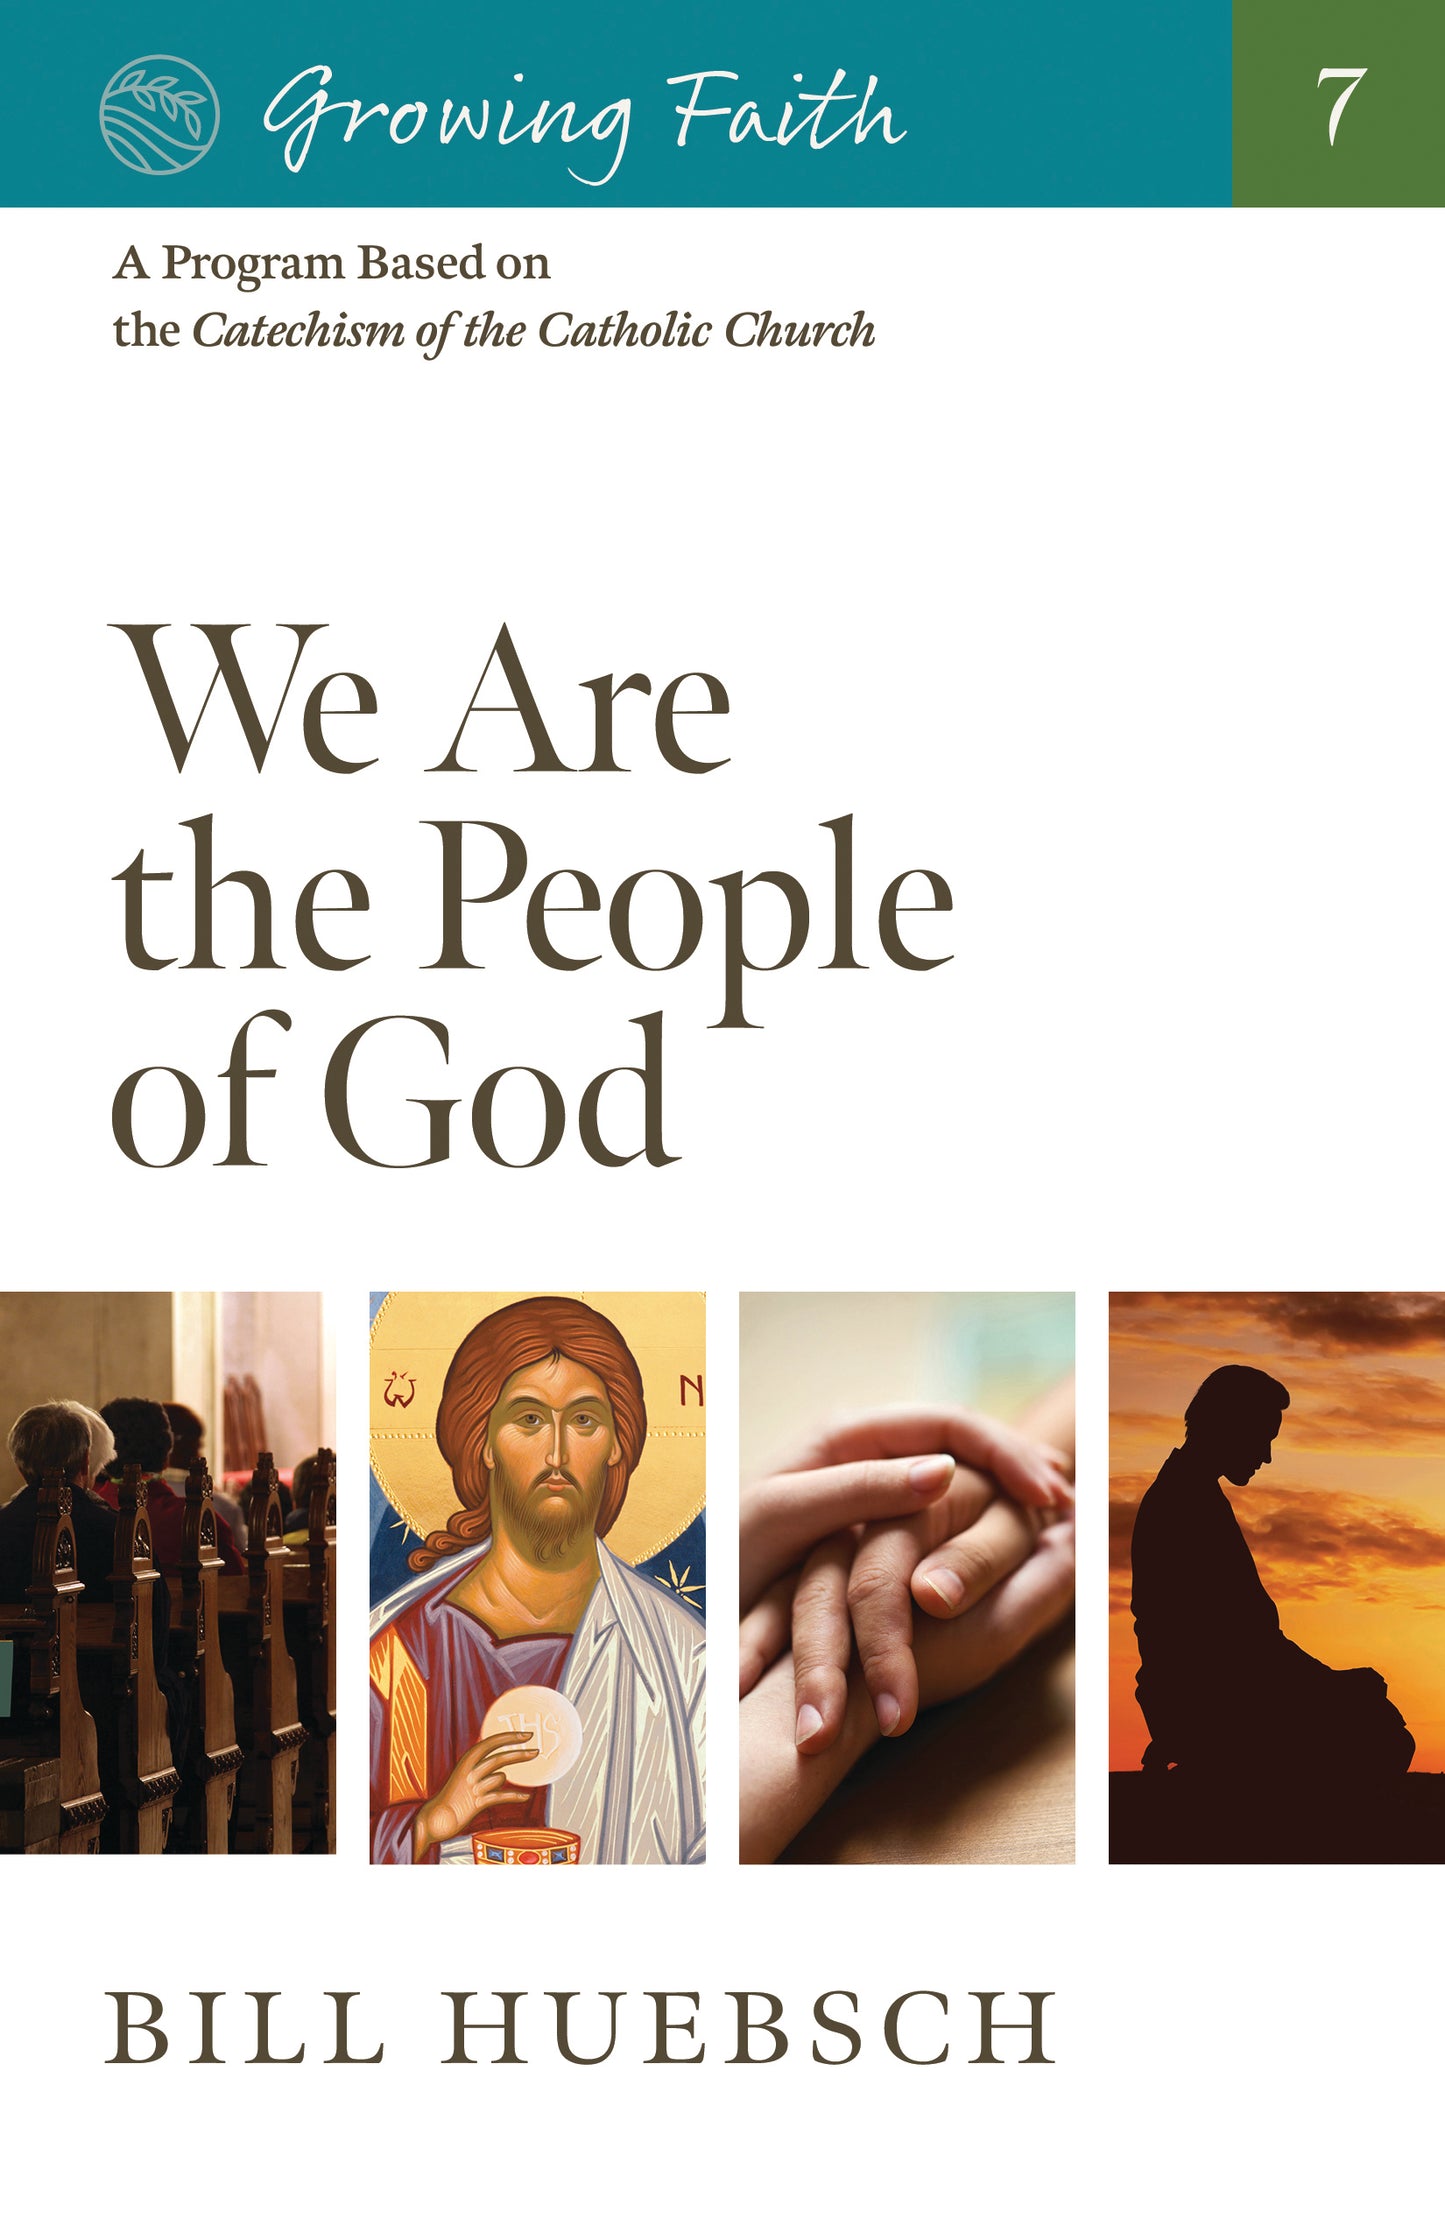 Growing Faith: We Are the People of God